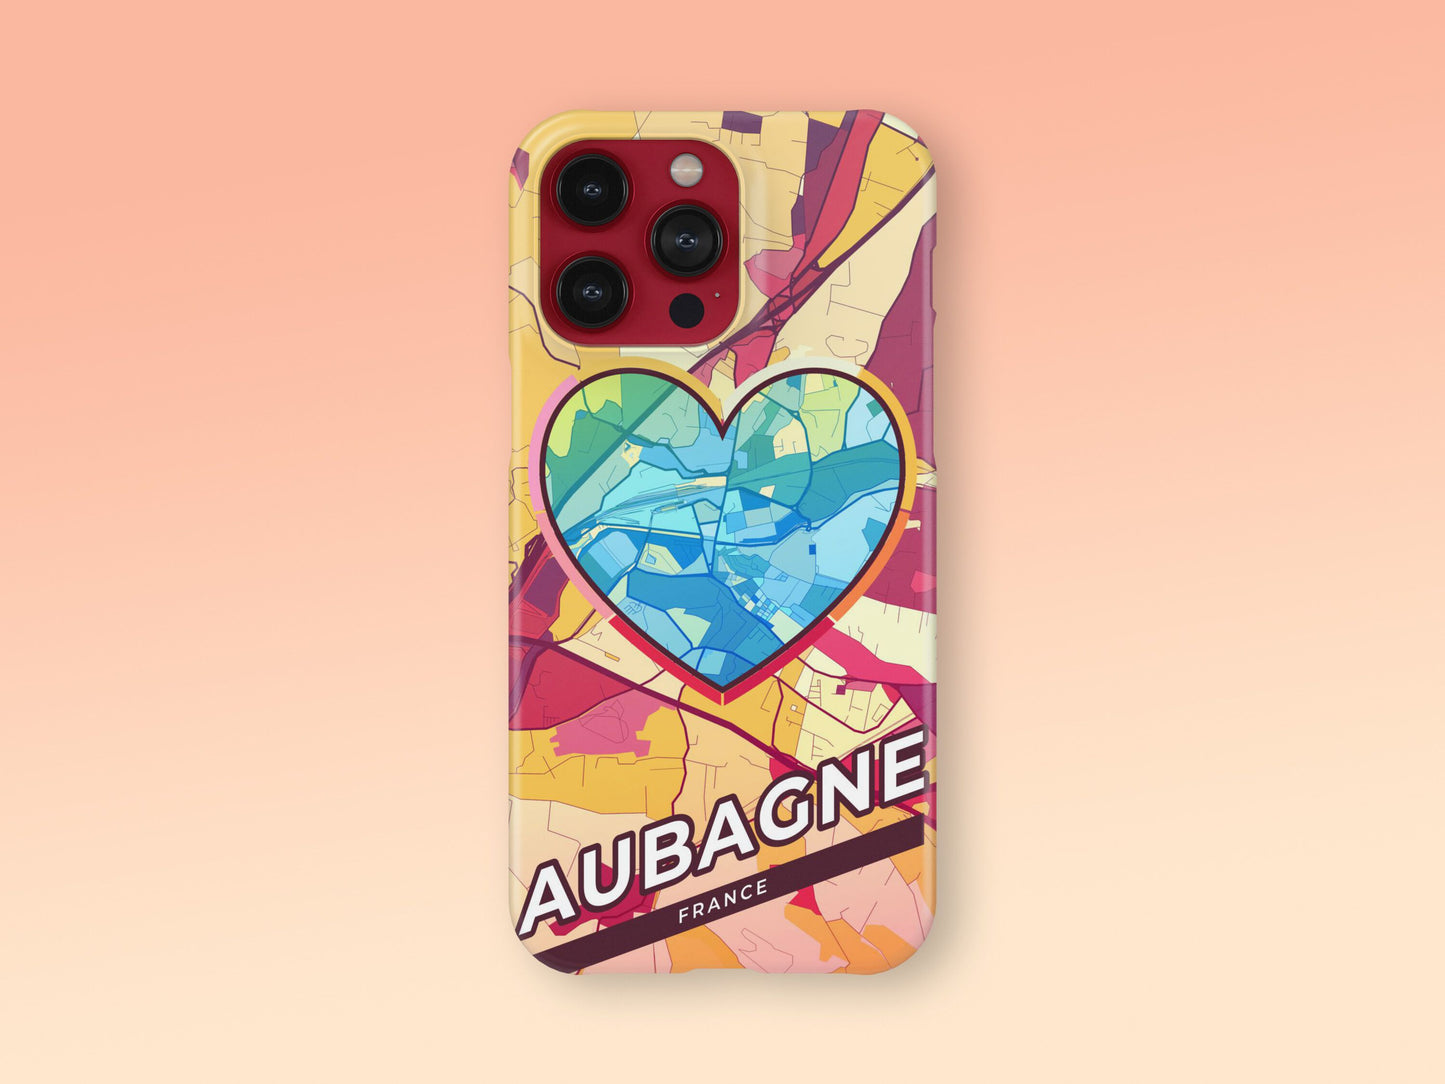 Aubagne France slim phone case with colorful icon. Birthday, wedding or housewarming gift. Couple match cases. 2